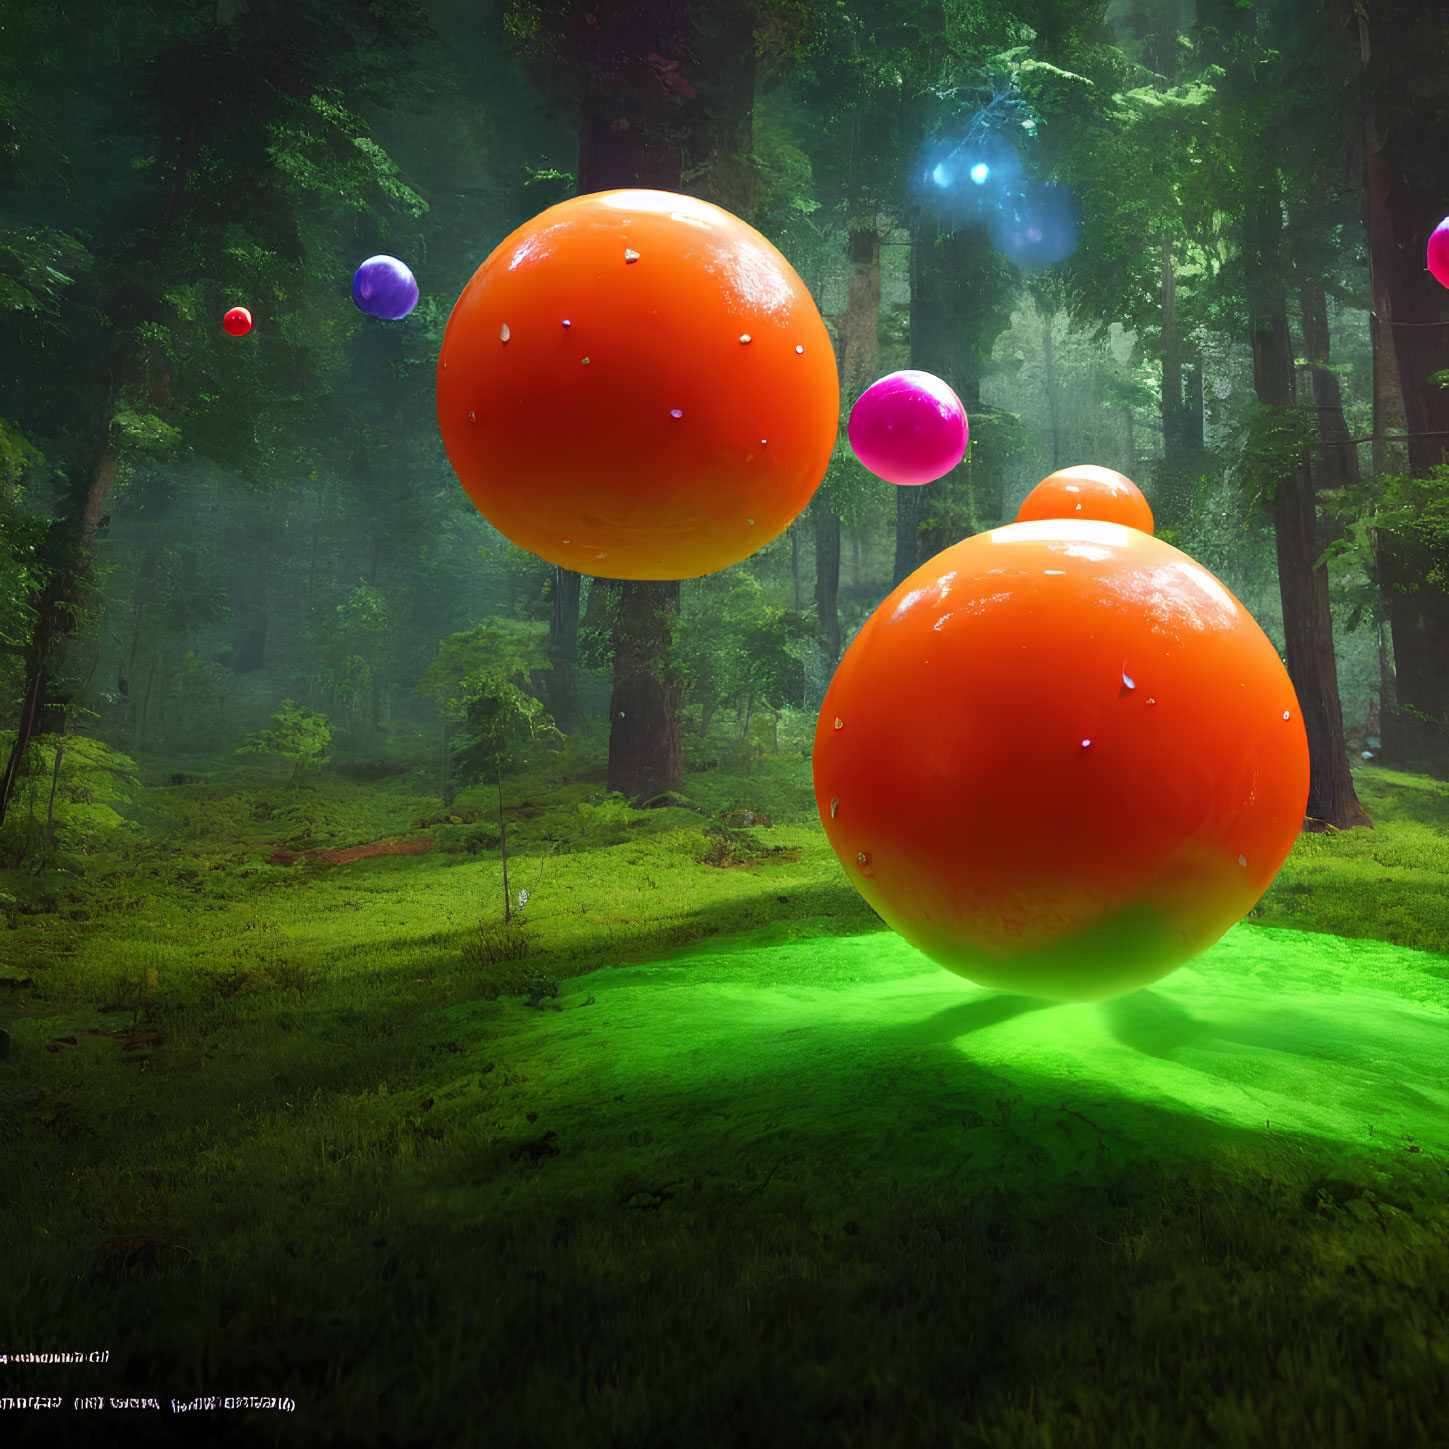 Mysterious oversized citrus fruits in sunlit forest